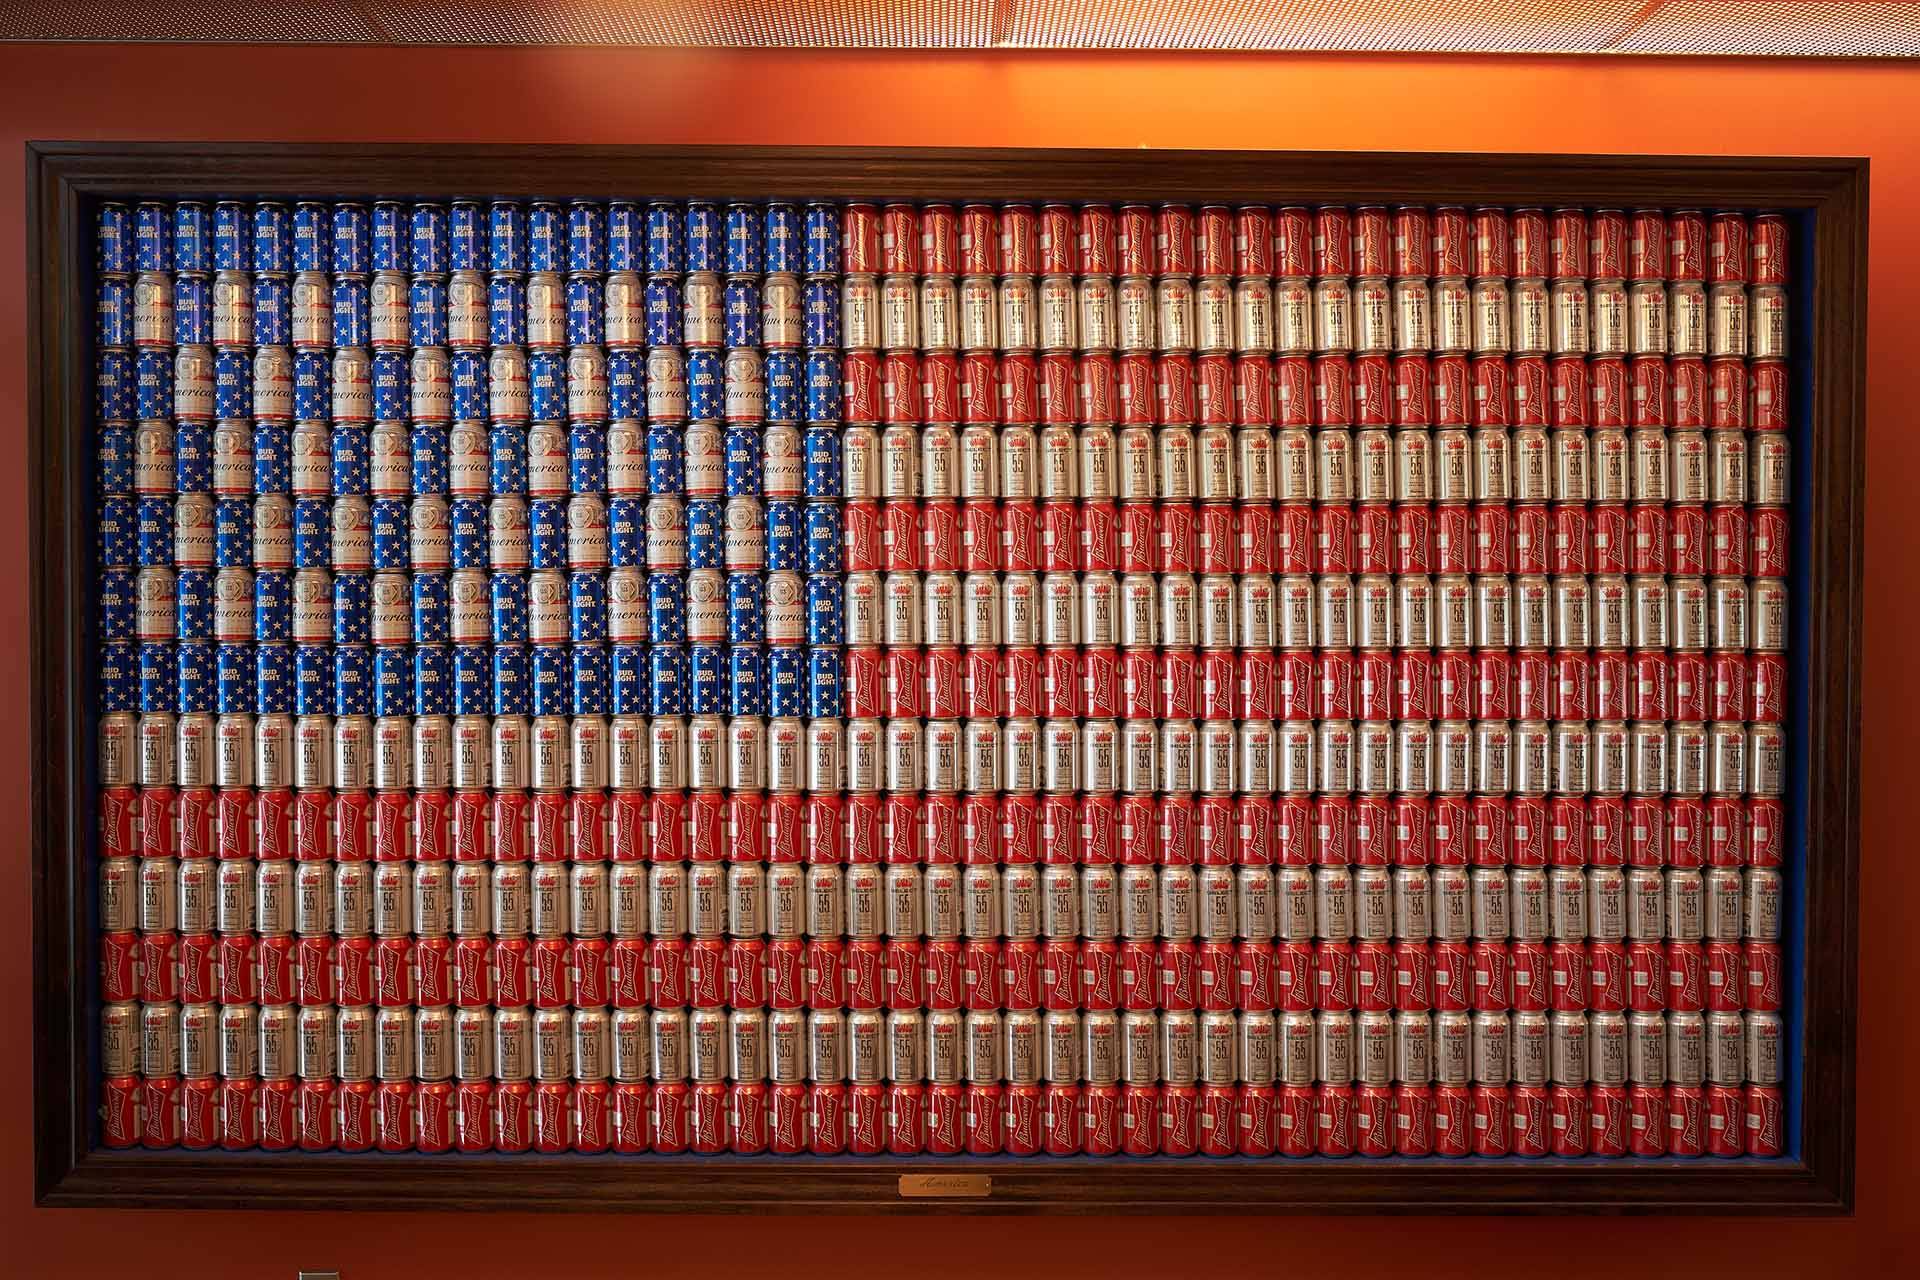 A mural of Brown Distributing's beer cans in the design of the American flag